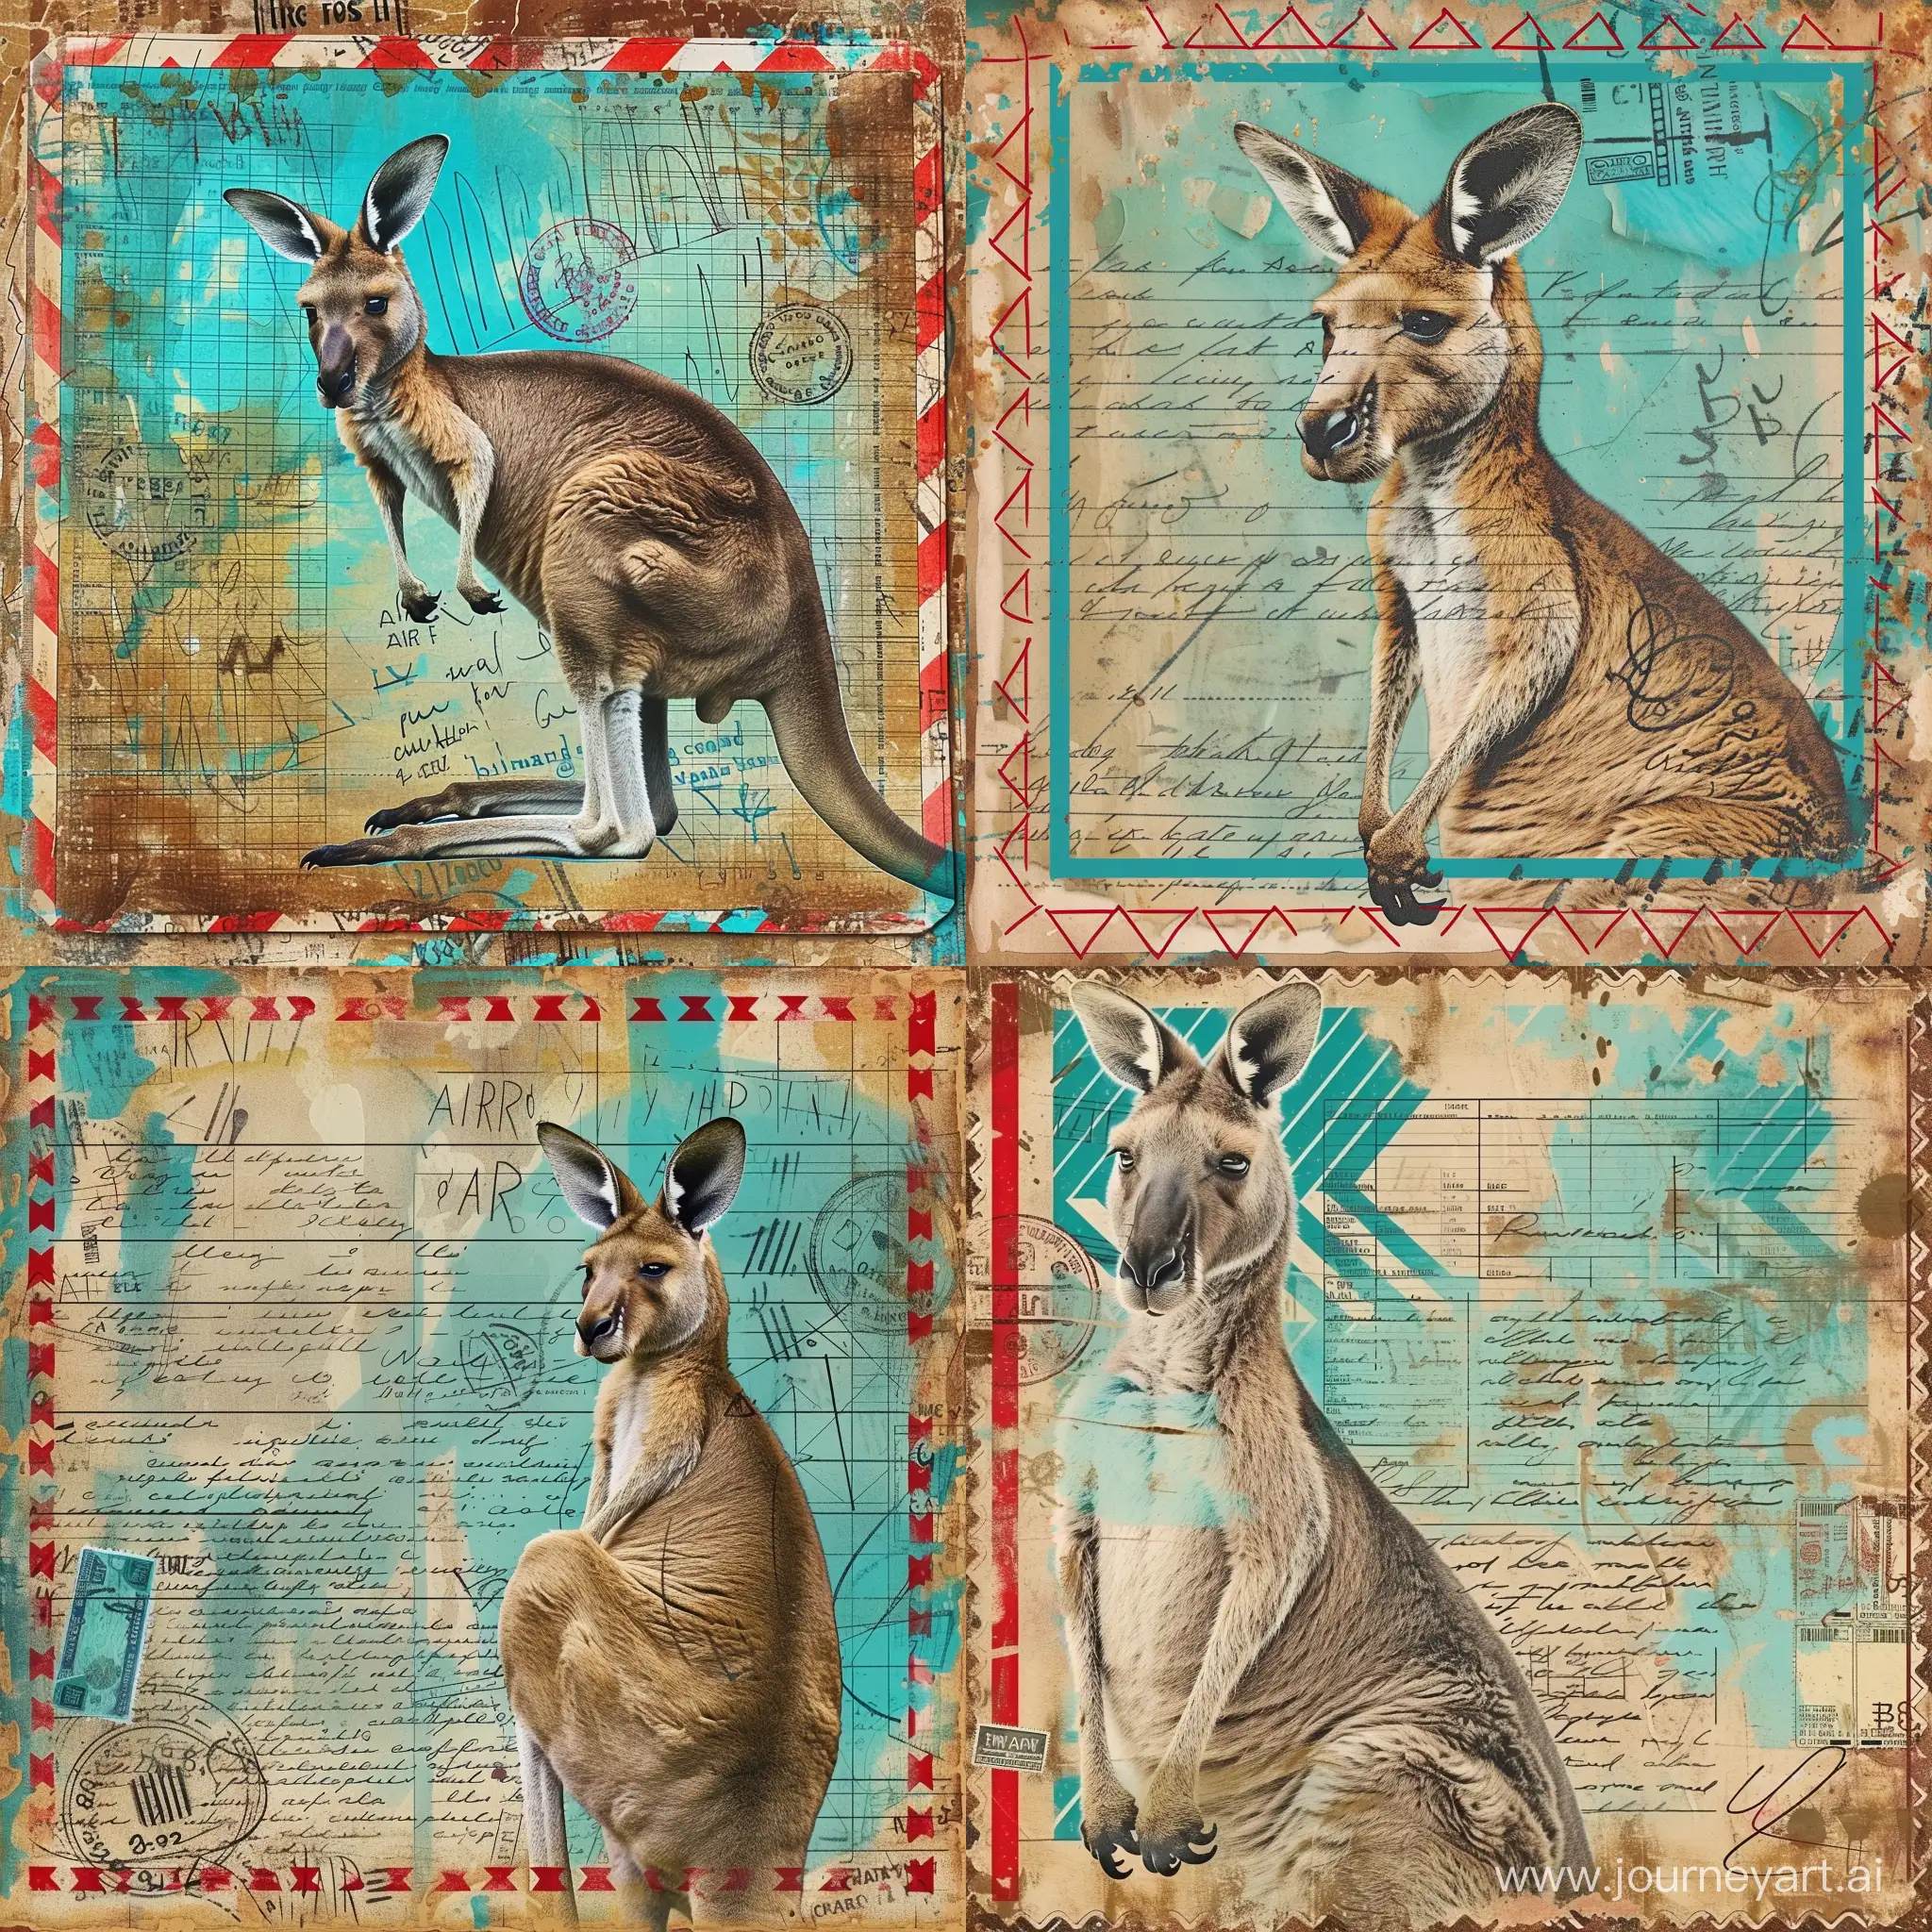 Vintage-Airmail-Kangaroo-Postcard-Art-with-Distressed-Mixed-Media-Collage-Aesthetic